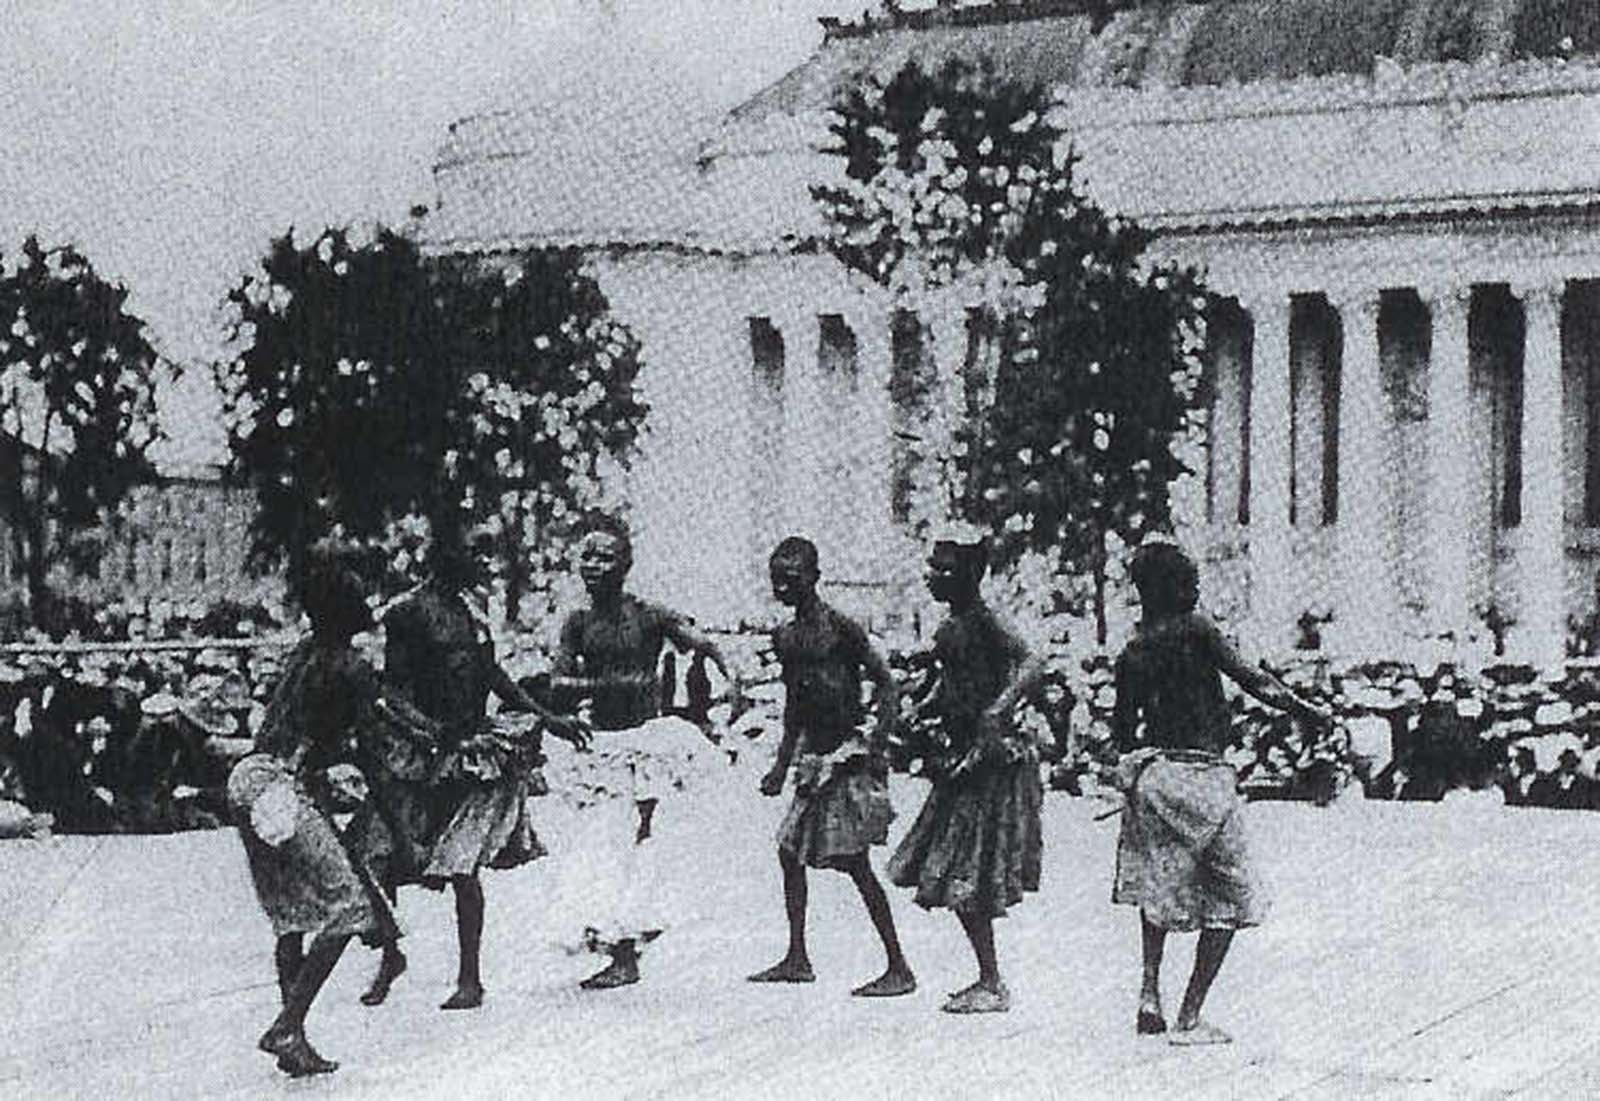 A Congolese Pygmy tribe dances at the St. Louis World Fair in 1904.